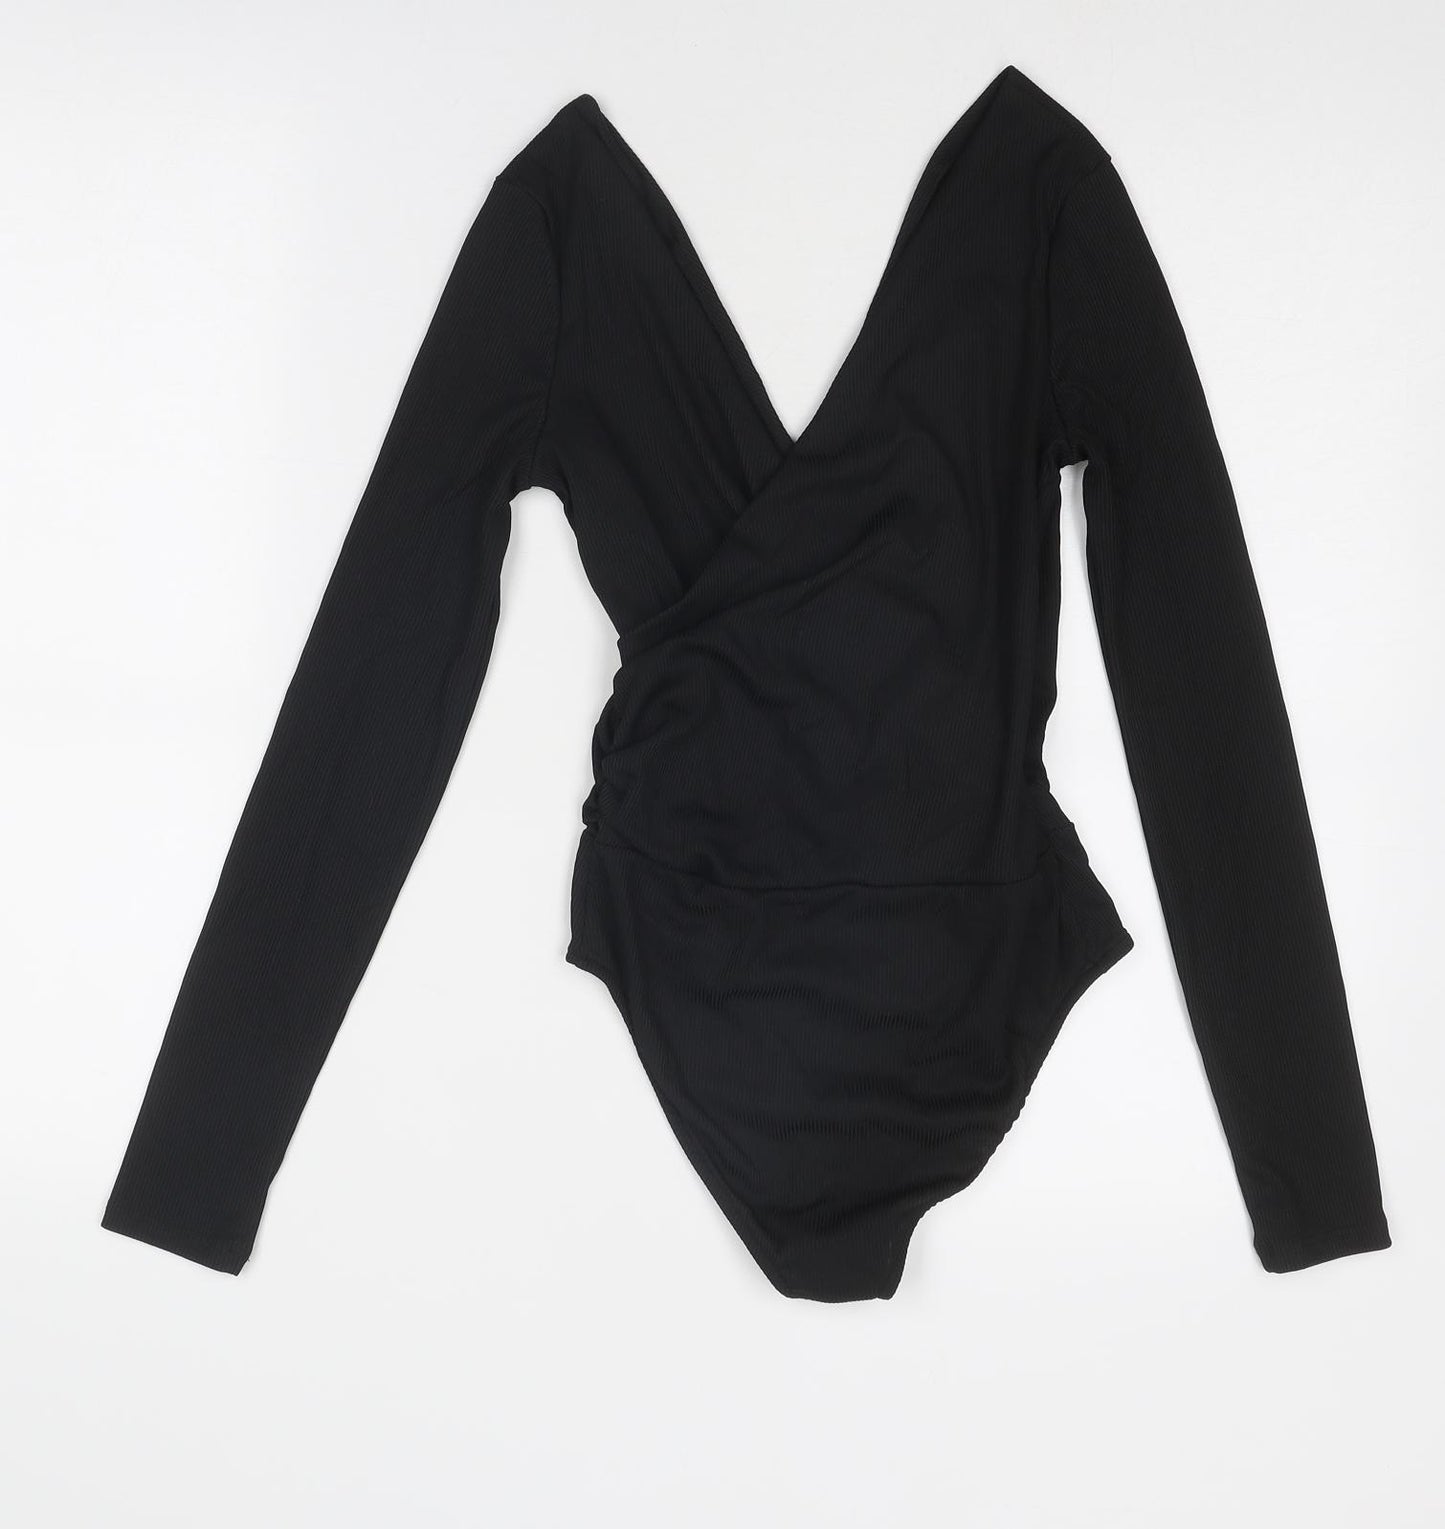 Topshop Womens Black Polyester Bodysuit One-Piece Size 8 Snap - Wrap Style